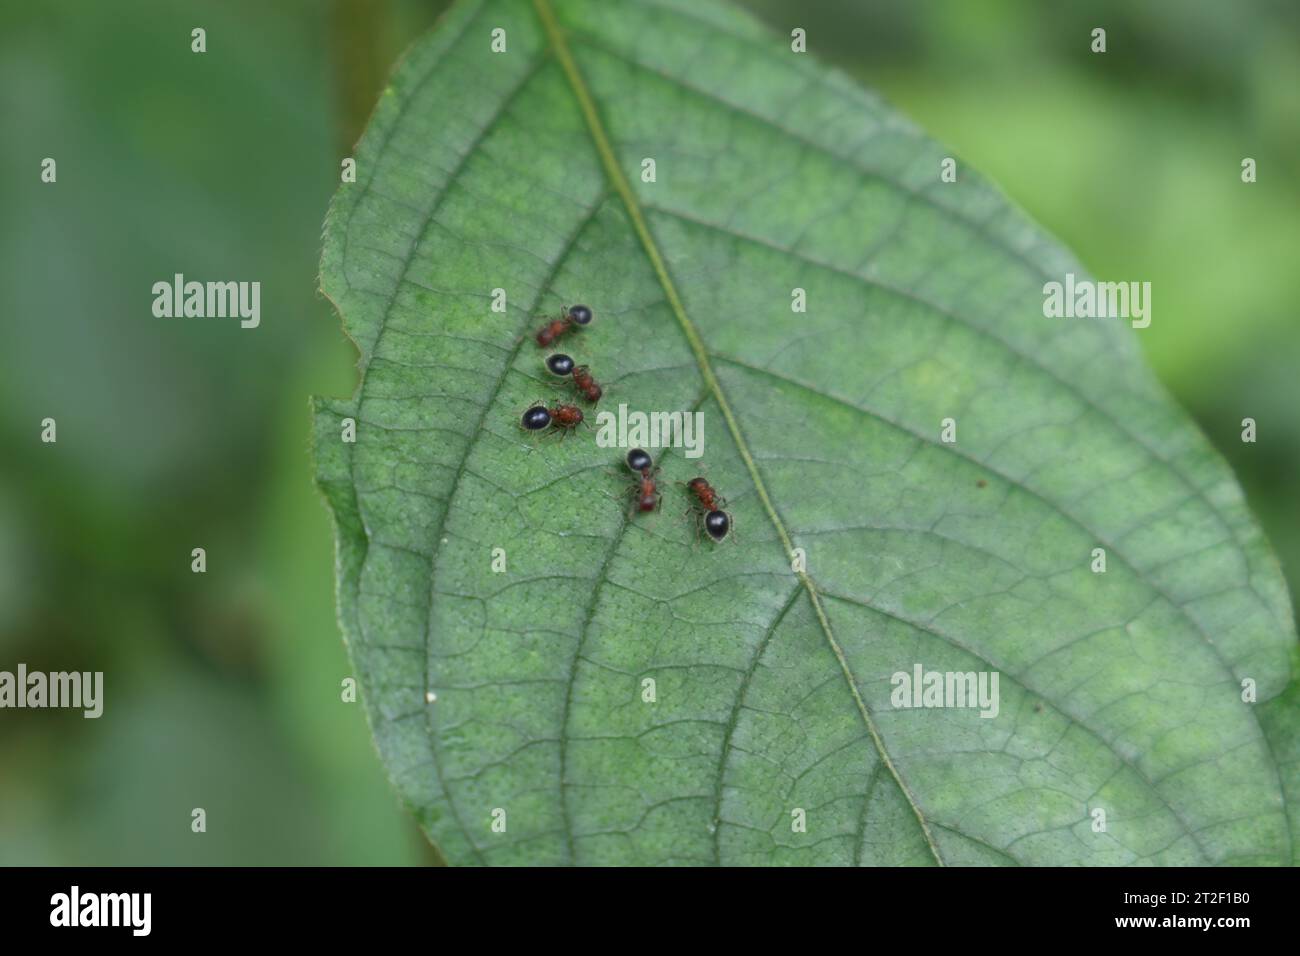 Overhead view of the few compact carpenter ants (Camponotus Planatus) Searching food while walking on the surface of a wild Mussaenda leaf Stock Photo